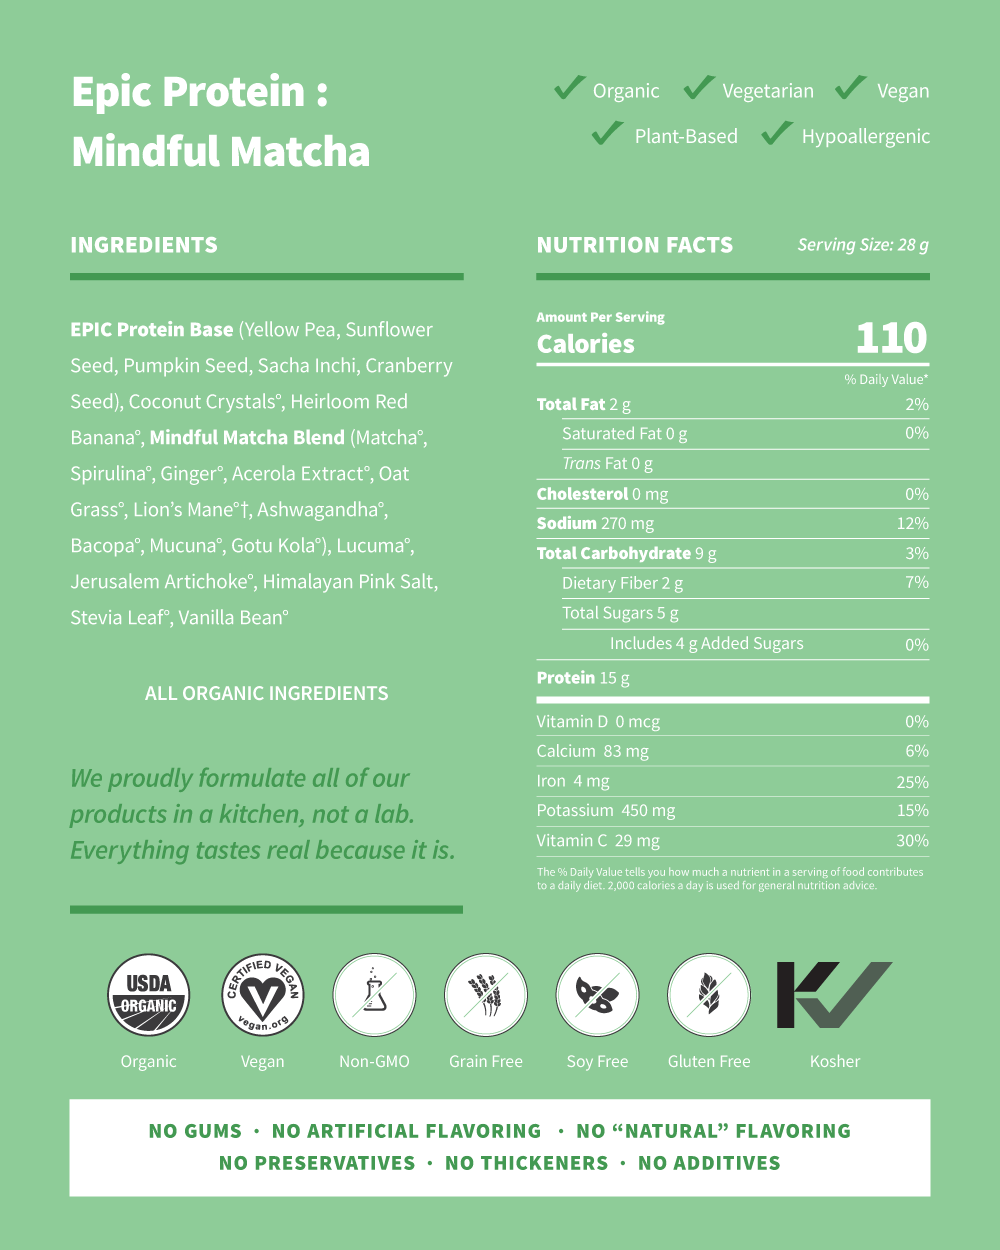 Epic Protein Mindful Matcha Nutrition Facts